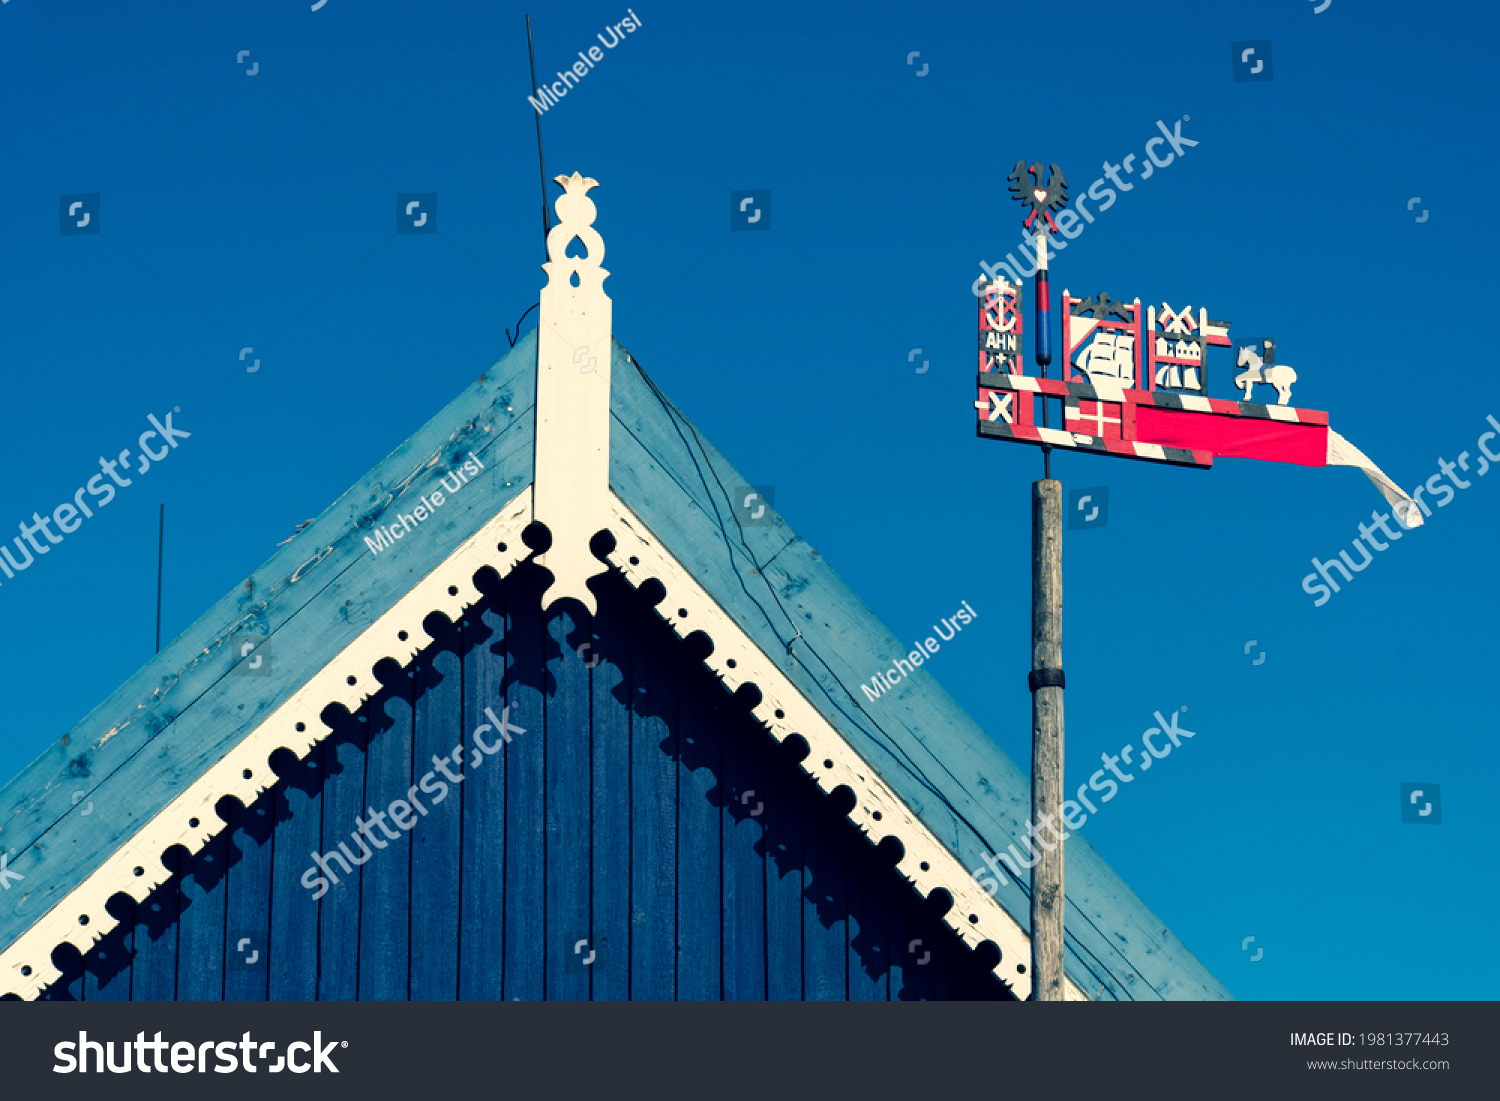 Beautiful colorful weathercock waving in the Curonian Spit in Nida fishermen's village, Lithuania, Europe with blue sky and roof of a wooden house #1981377443